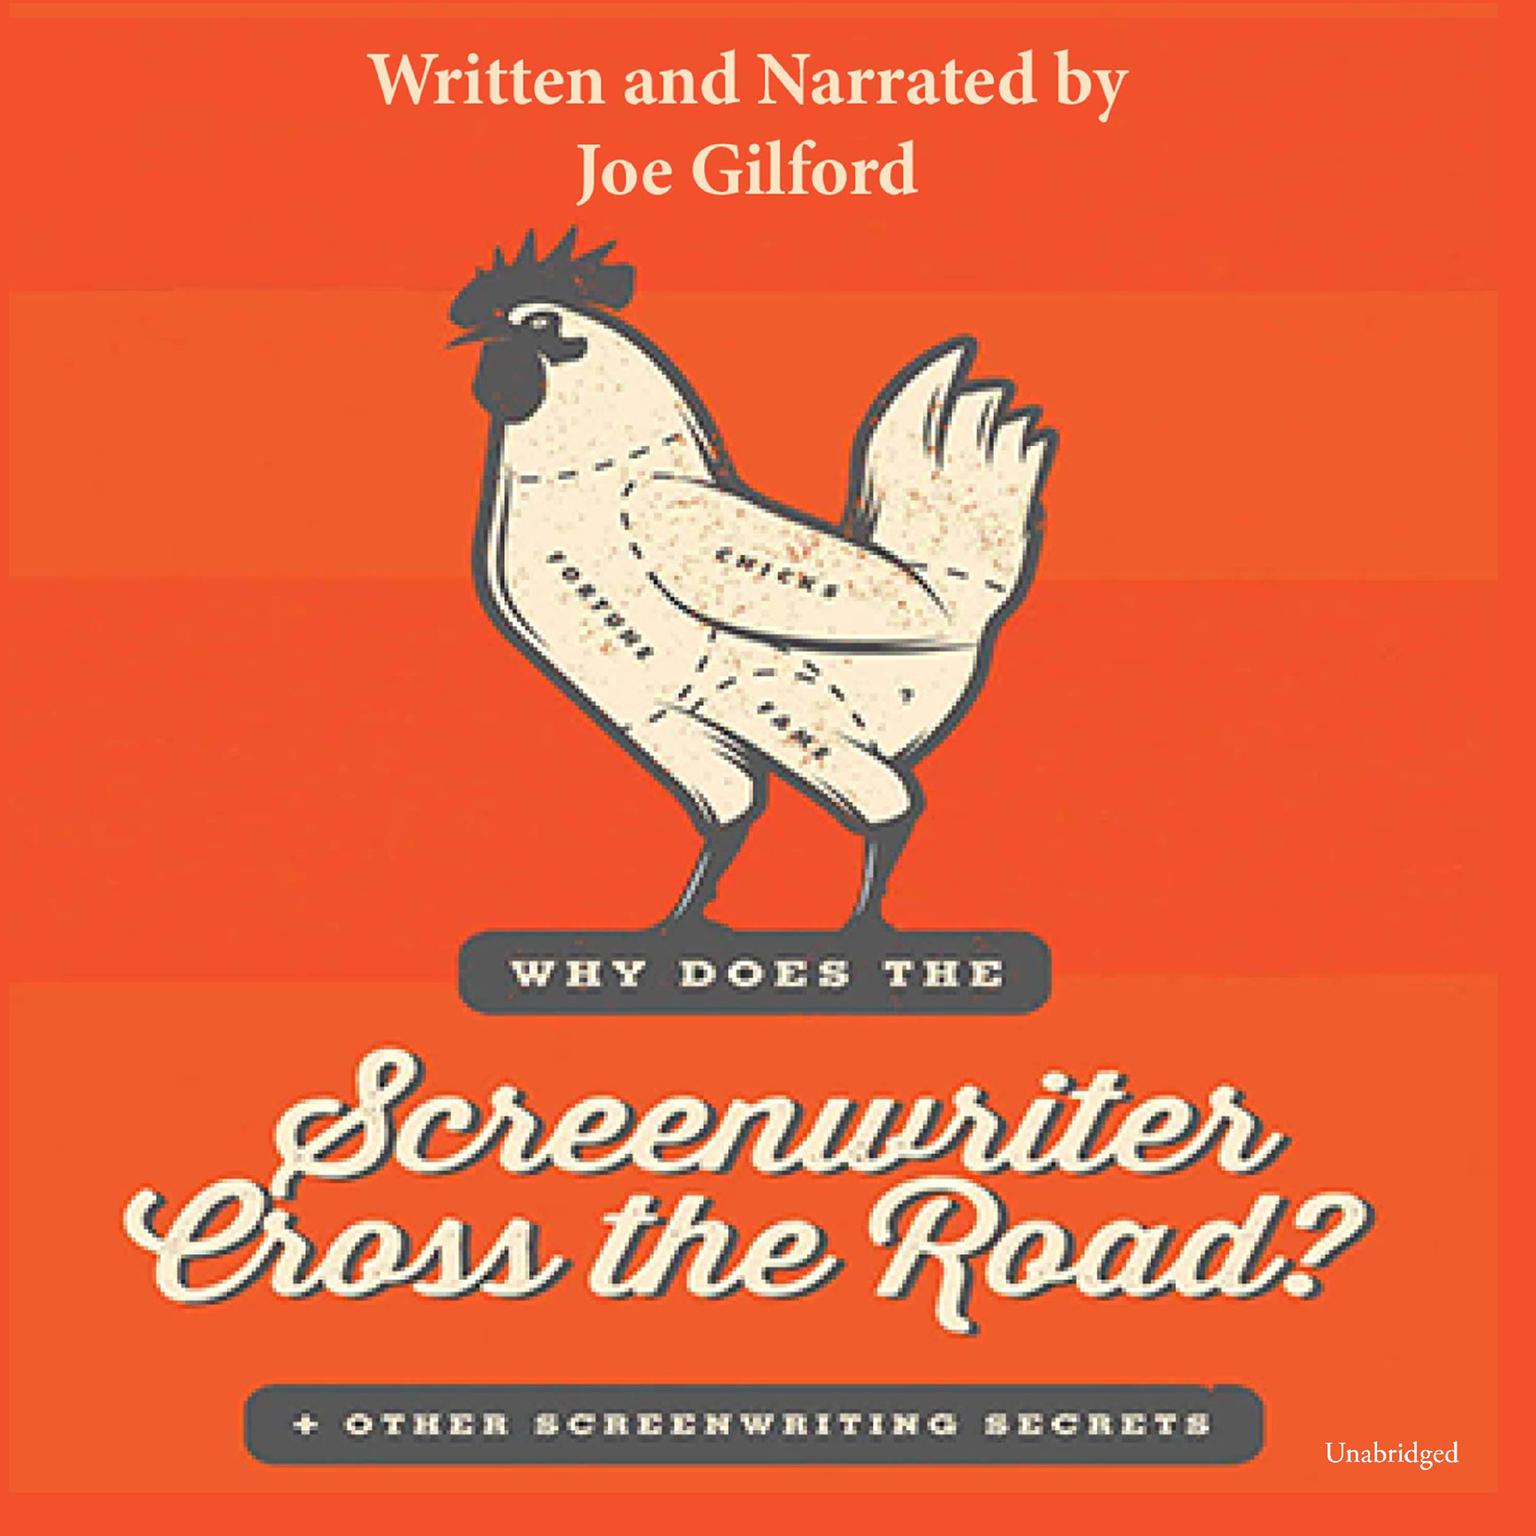 Why Does the Screenwriter Cross the Road?: And Other Screenwriting Secrets Audiobook, by Joe Gilford